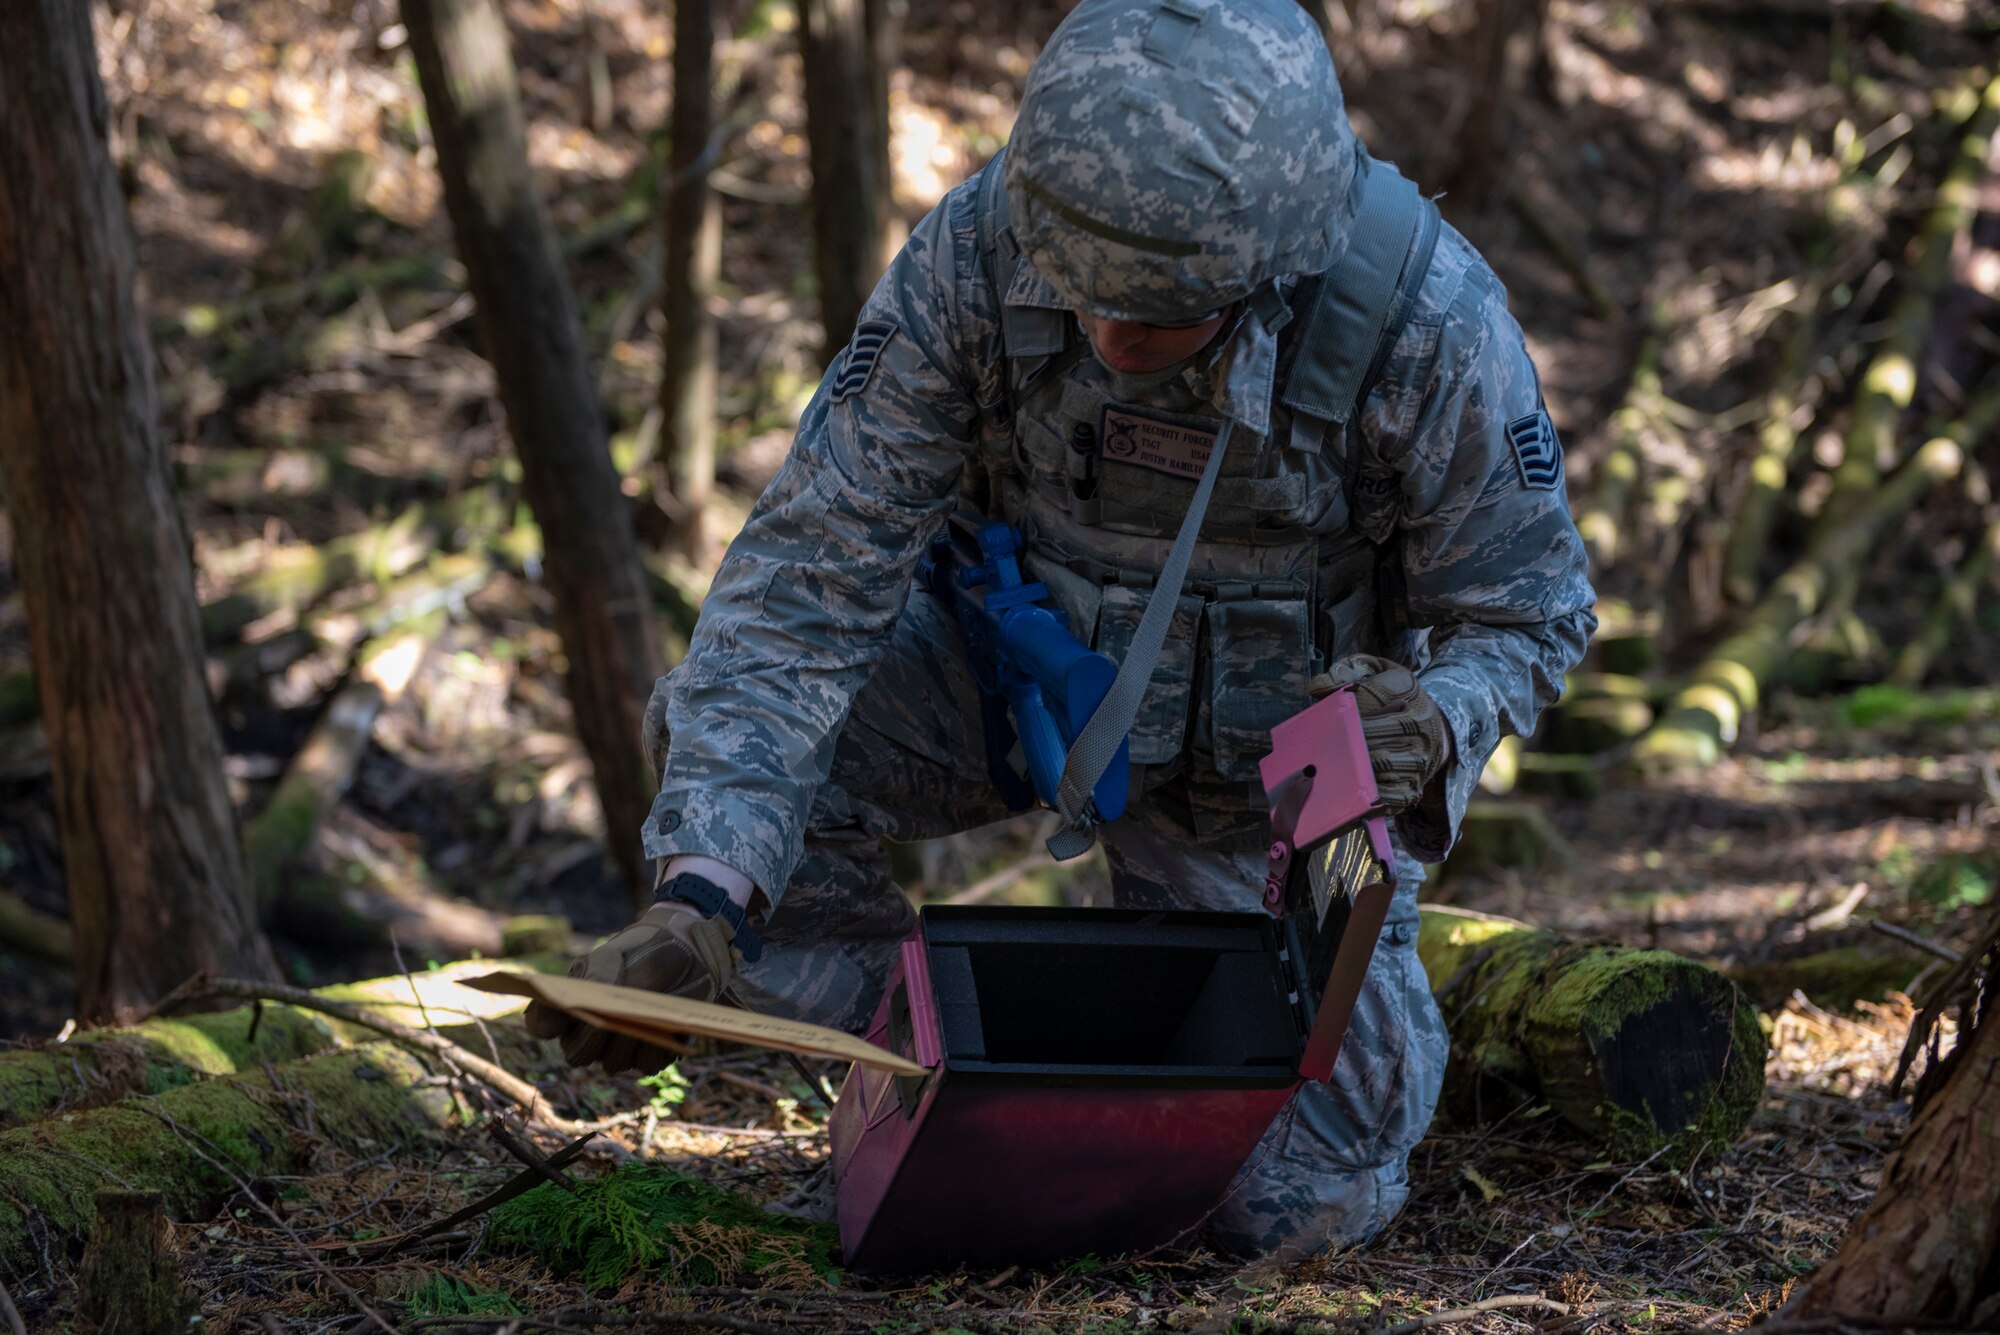 U.S. Air Force Tech. Sgt. Justin Hamilton, 374th Security Forces Squadron flight chief, opens a container holding intelligence information marking the completion of his team’s first objective during a field training exercise at Camp Fuji, Japan, Nov. 8, 2018.